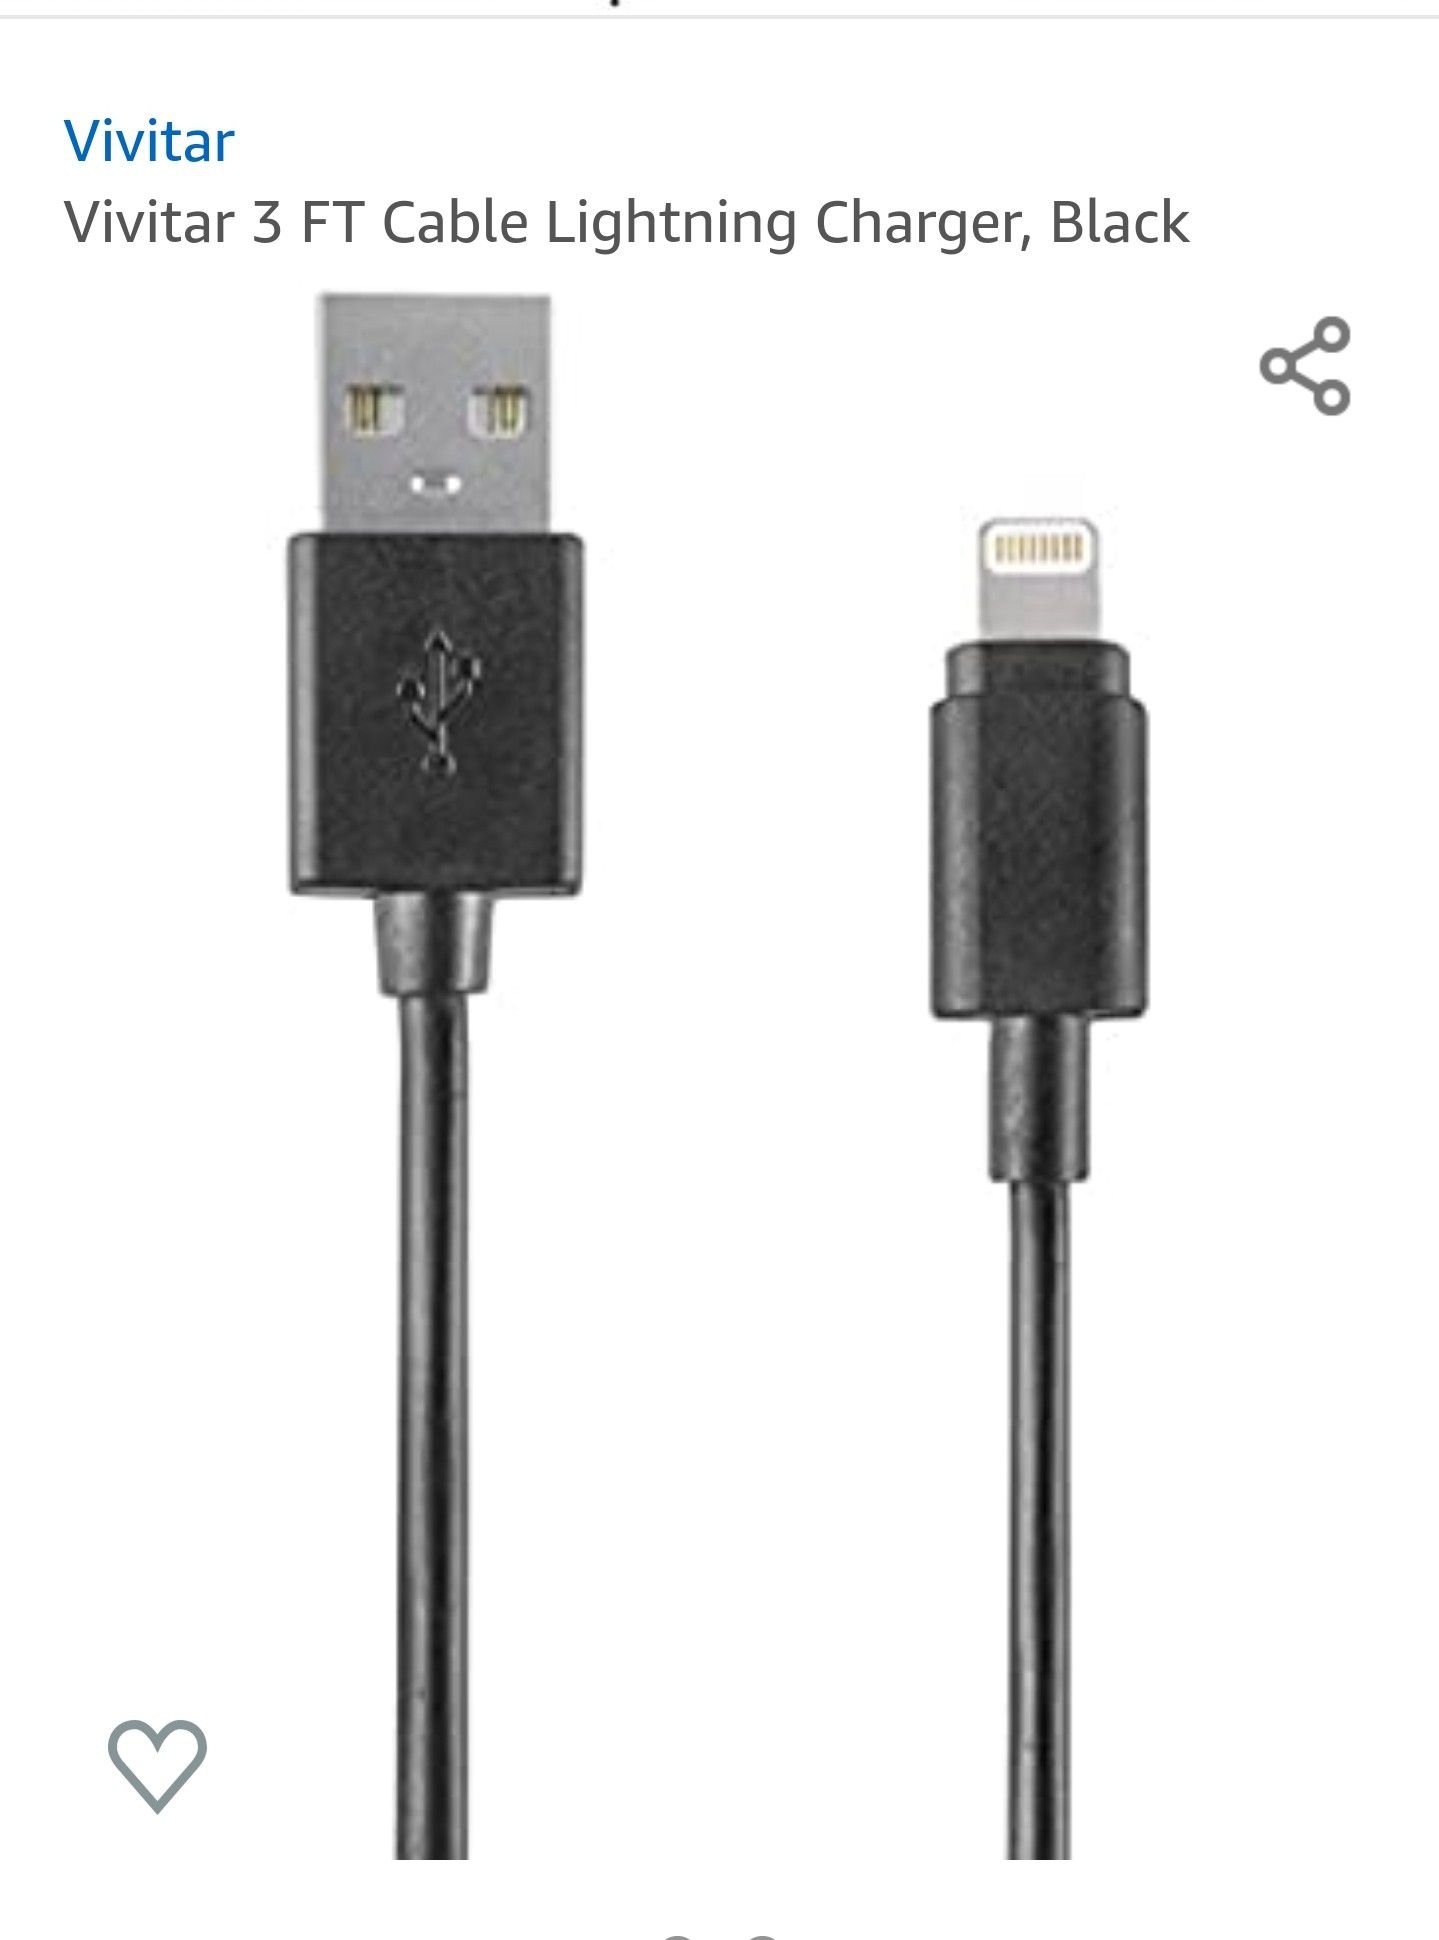 3 FT Cable Charger, BlackApple MFi Certified FlatLightning to USB Charge & Sync Cable, 3ft Black